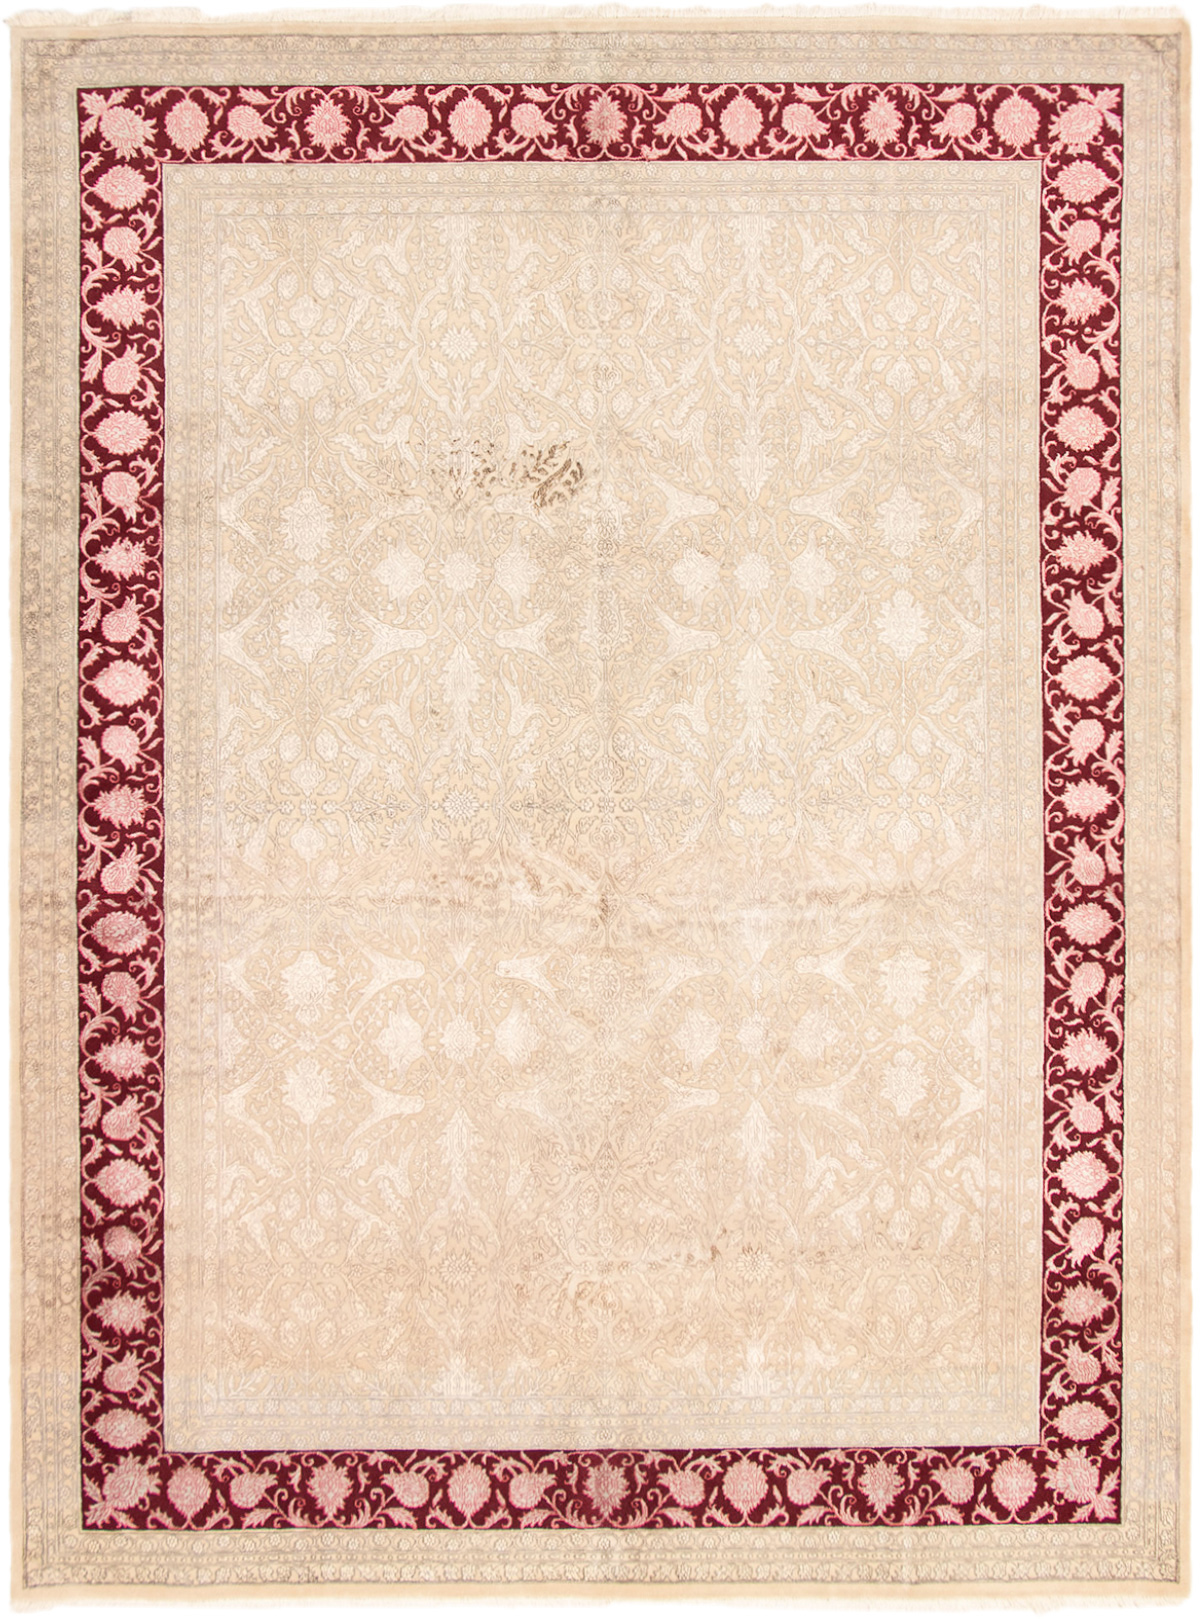 Hand-knotted Harrir Select Beige Wool/Silk Rug 9'0" x 12'0" Size: 9'0" x 12'0"  